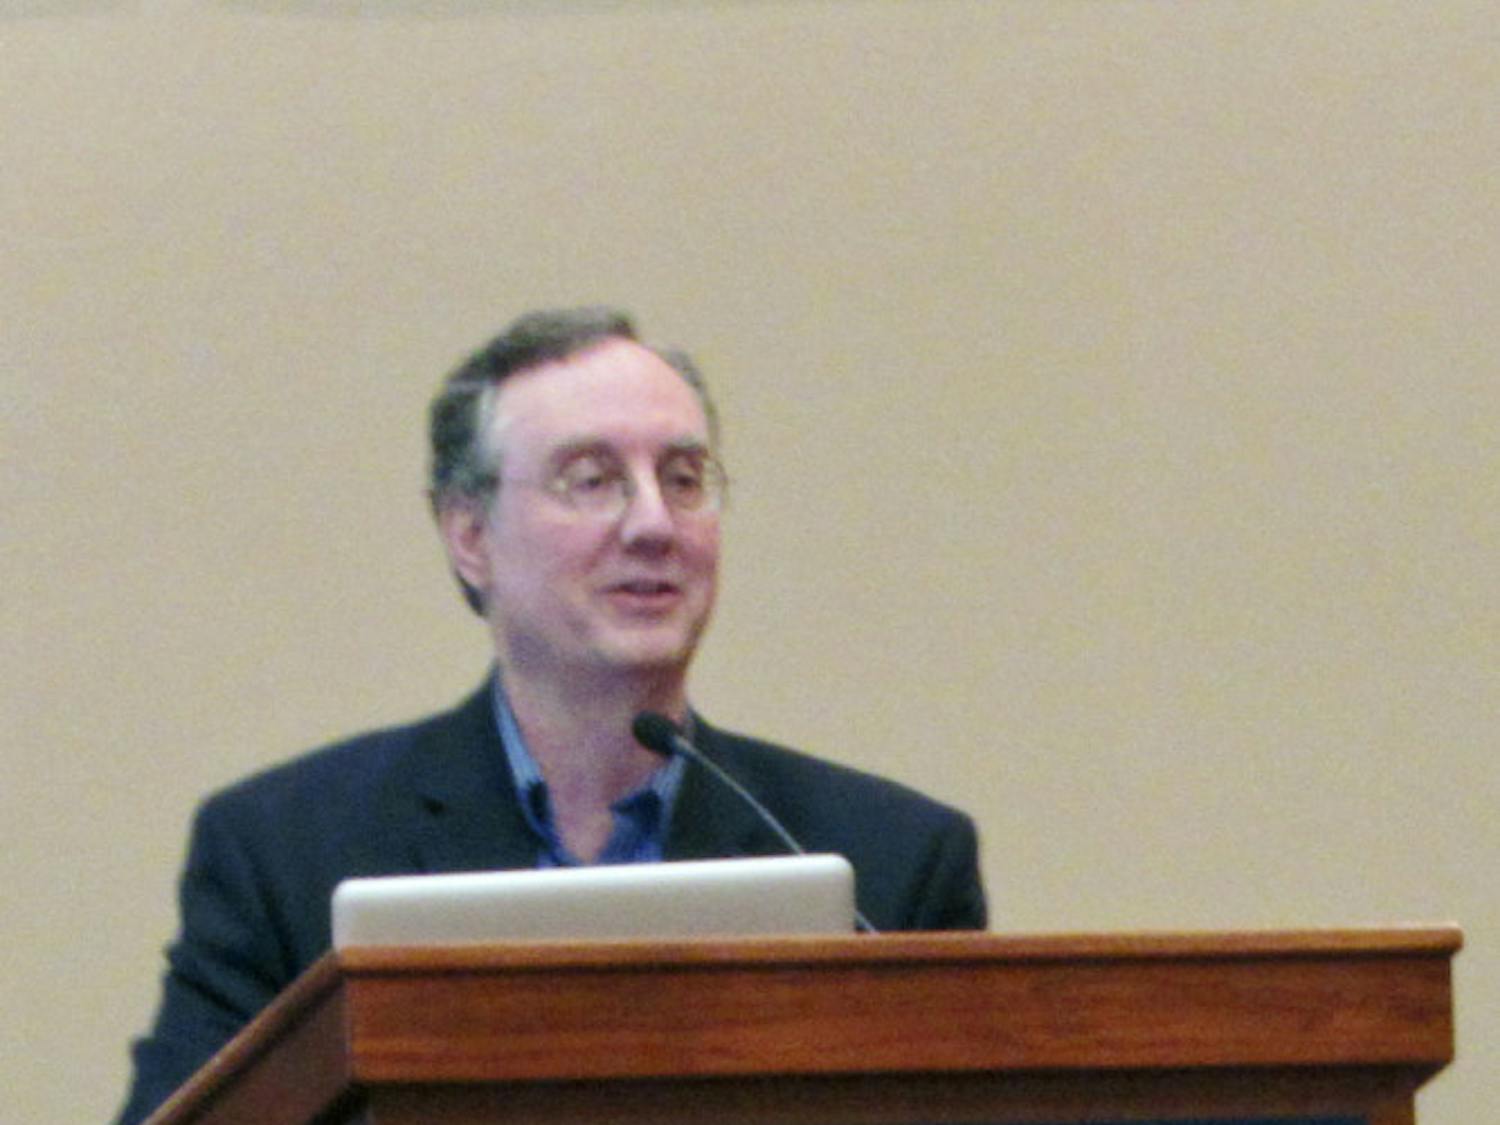 Dr. Juan Cole, a professor of history from the University of Michigan, speaks to an audience on youth involvement in Middle Eastern politics in the Reitz Union Grand Ballroom on Thursday night.